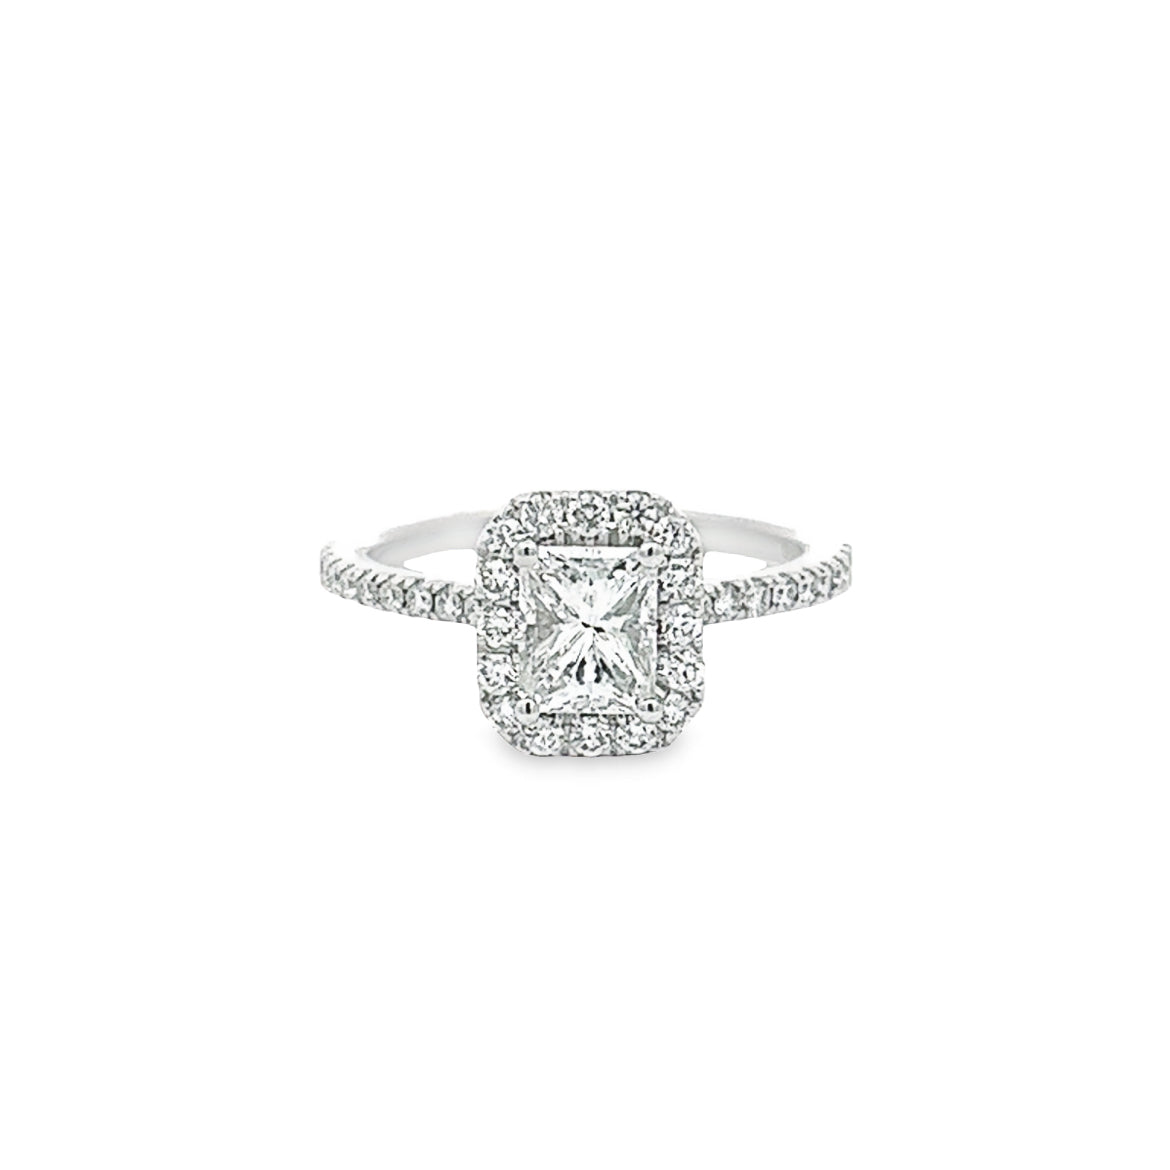 The Terry 18K White Gold Radiant Halo Engagement Ring